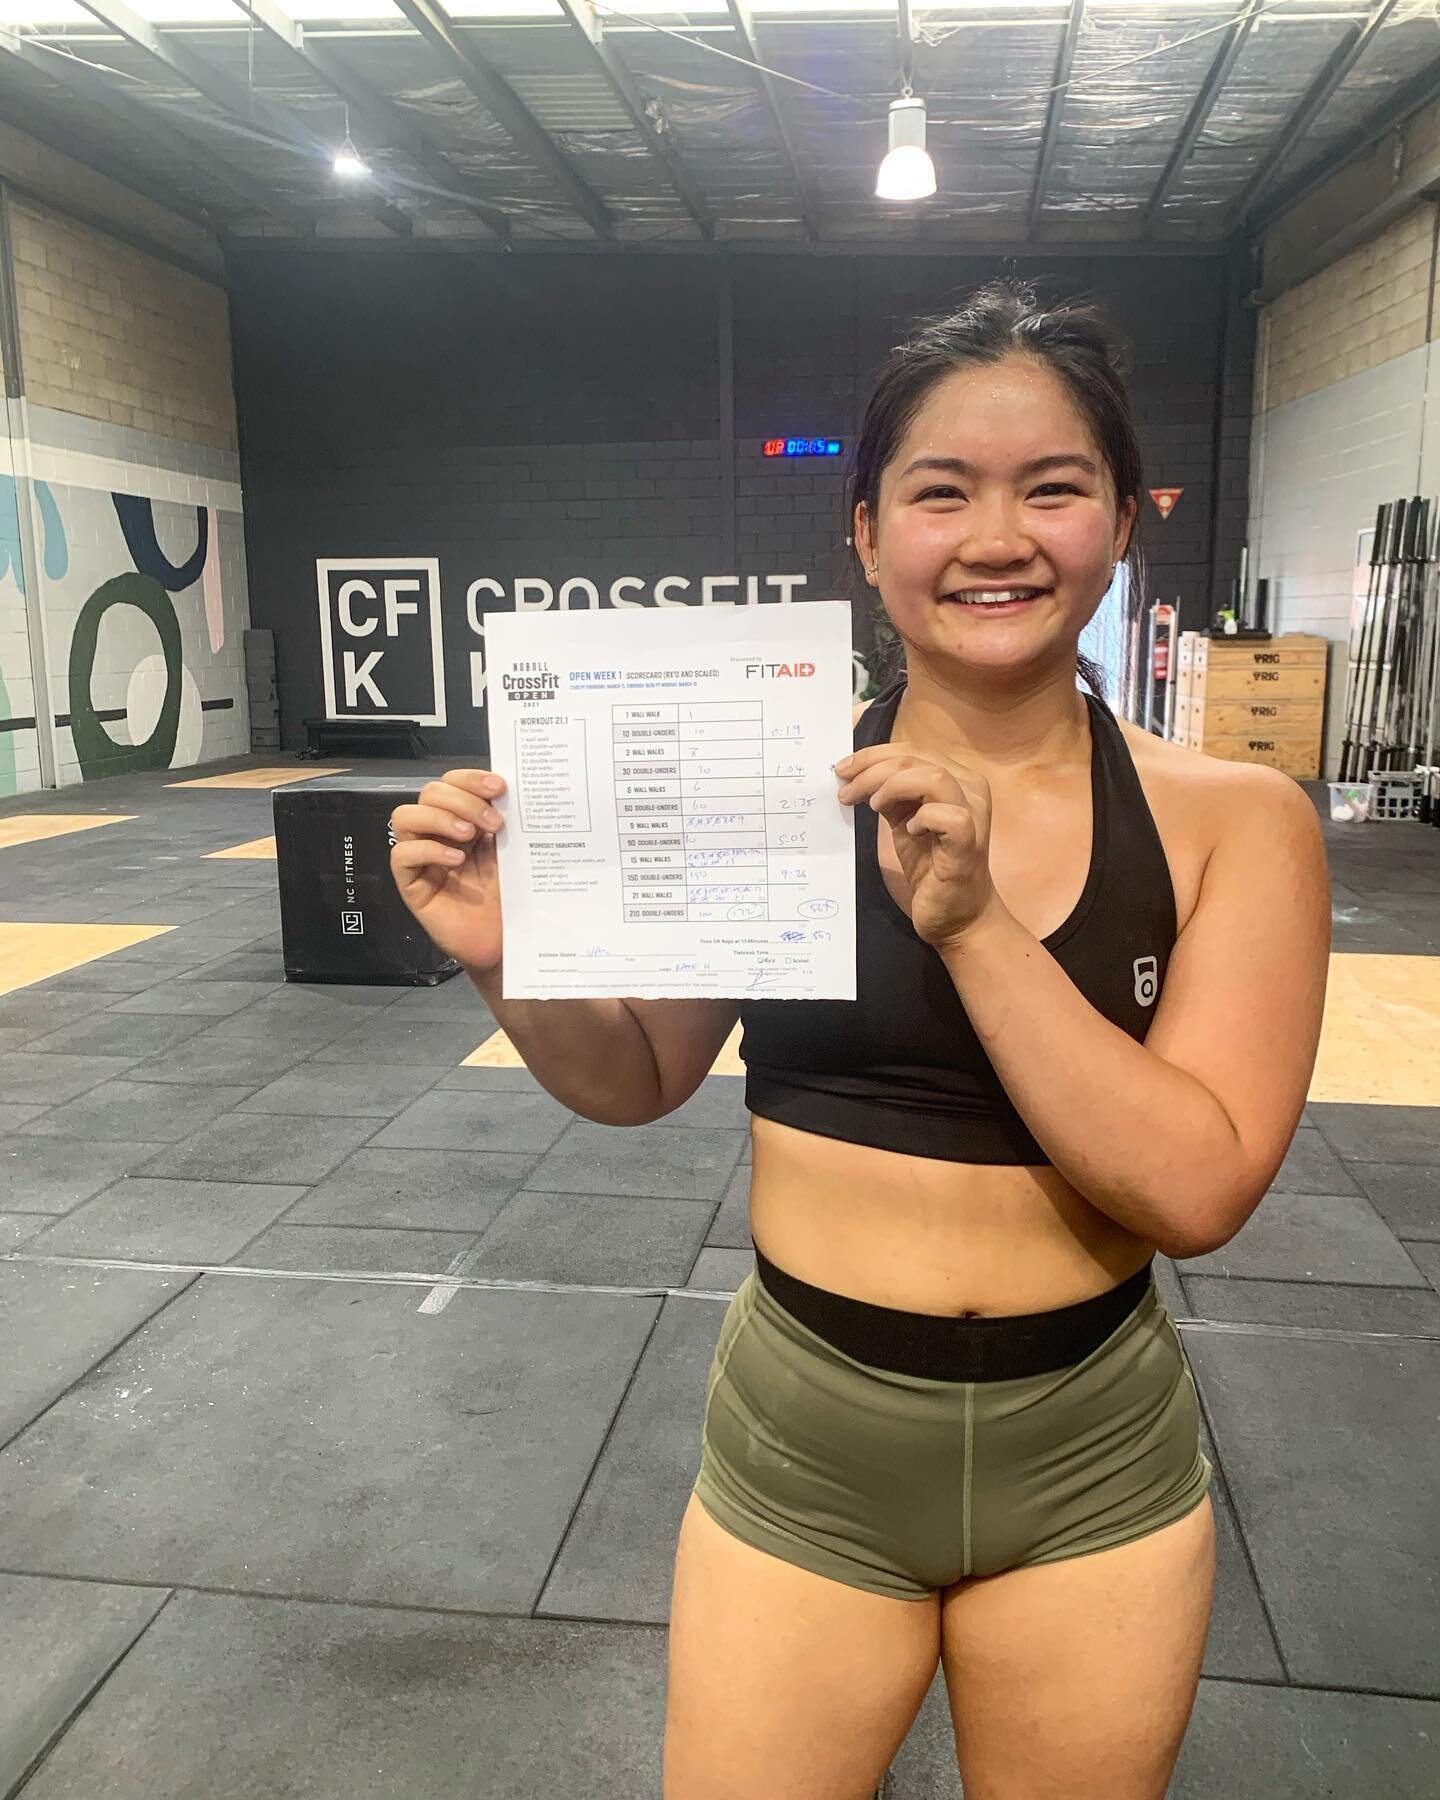 Congrats Val 567 reps in #21point1 💙🤙

#CFK #CrossFit #gains @vilocirapter